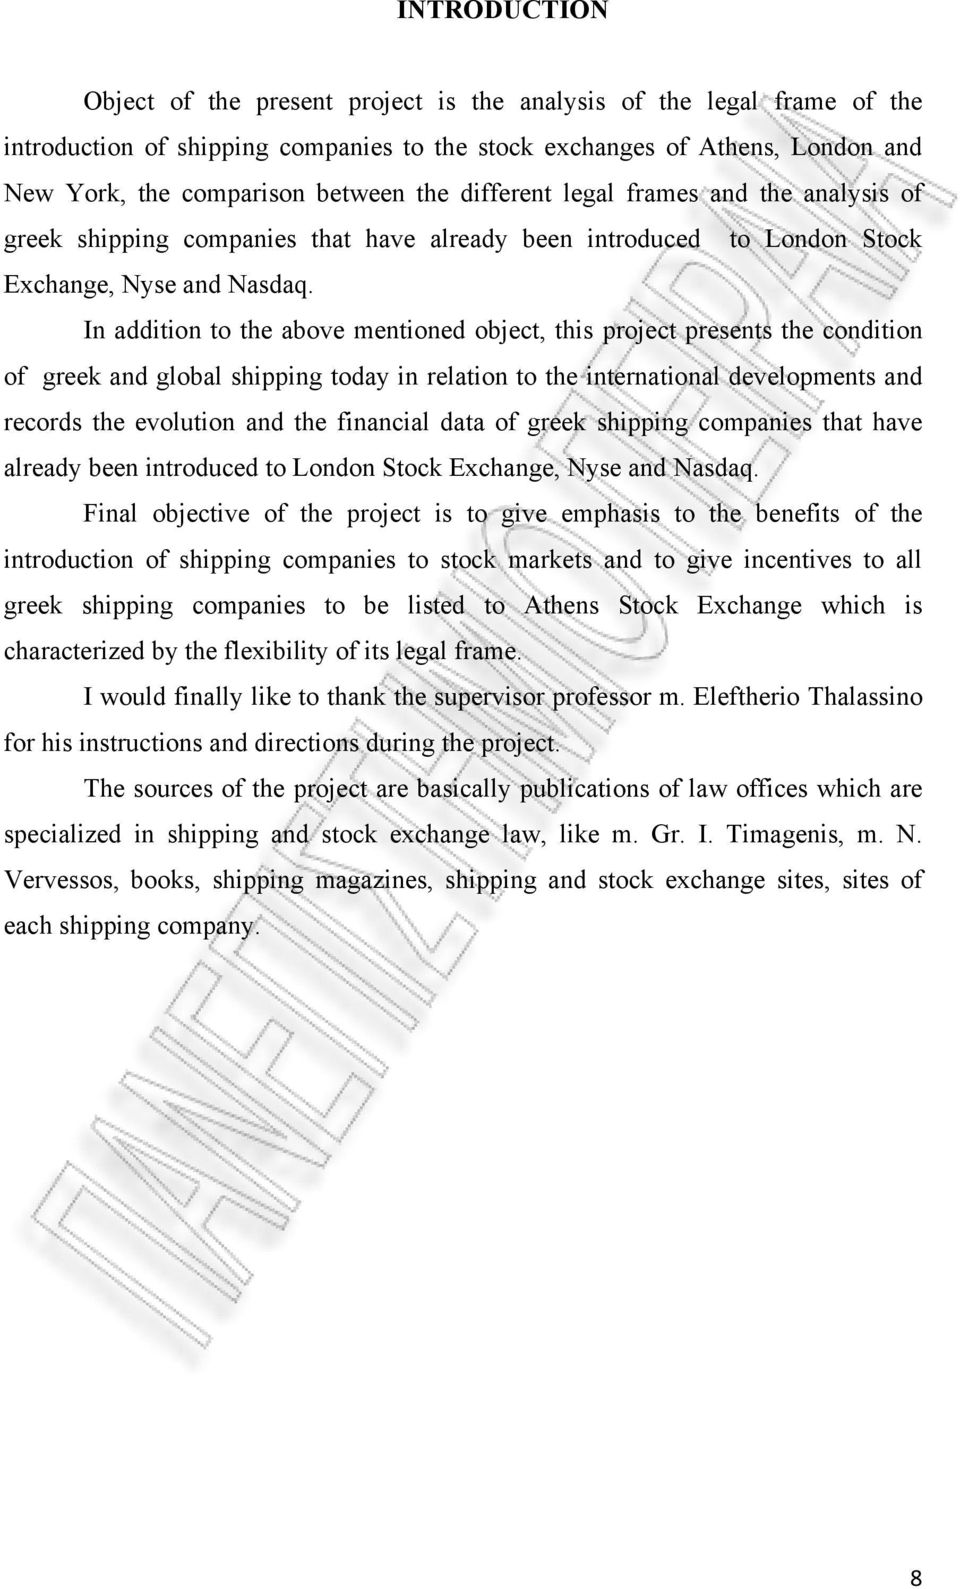 In addition to the above mentioned object, this project presents the condition of greek and global shipping today in relation to the international developments and records the evolution and the